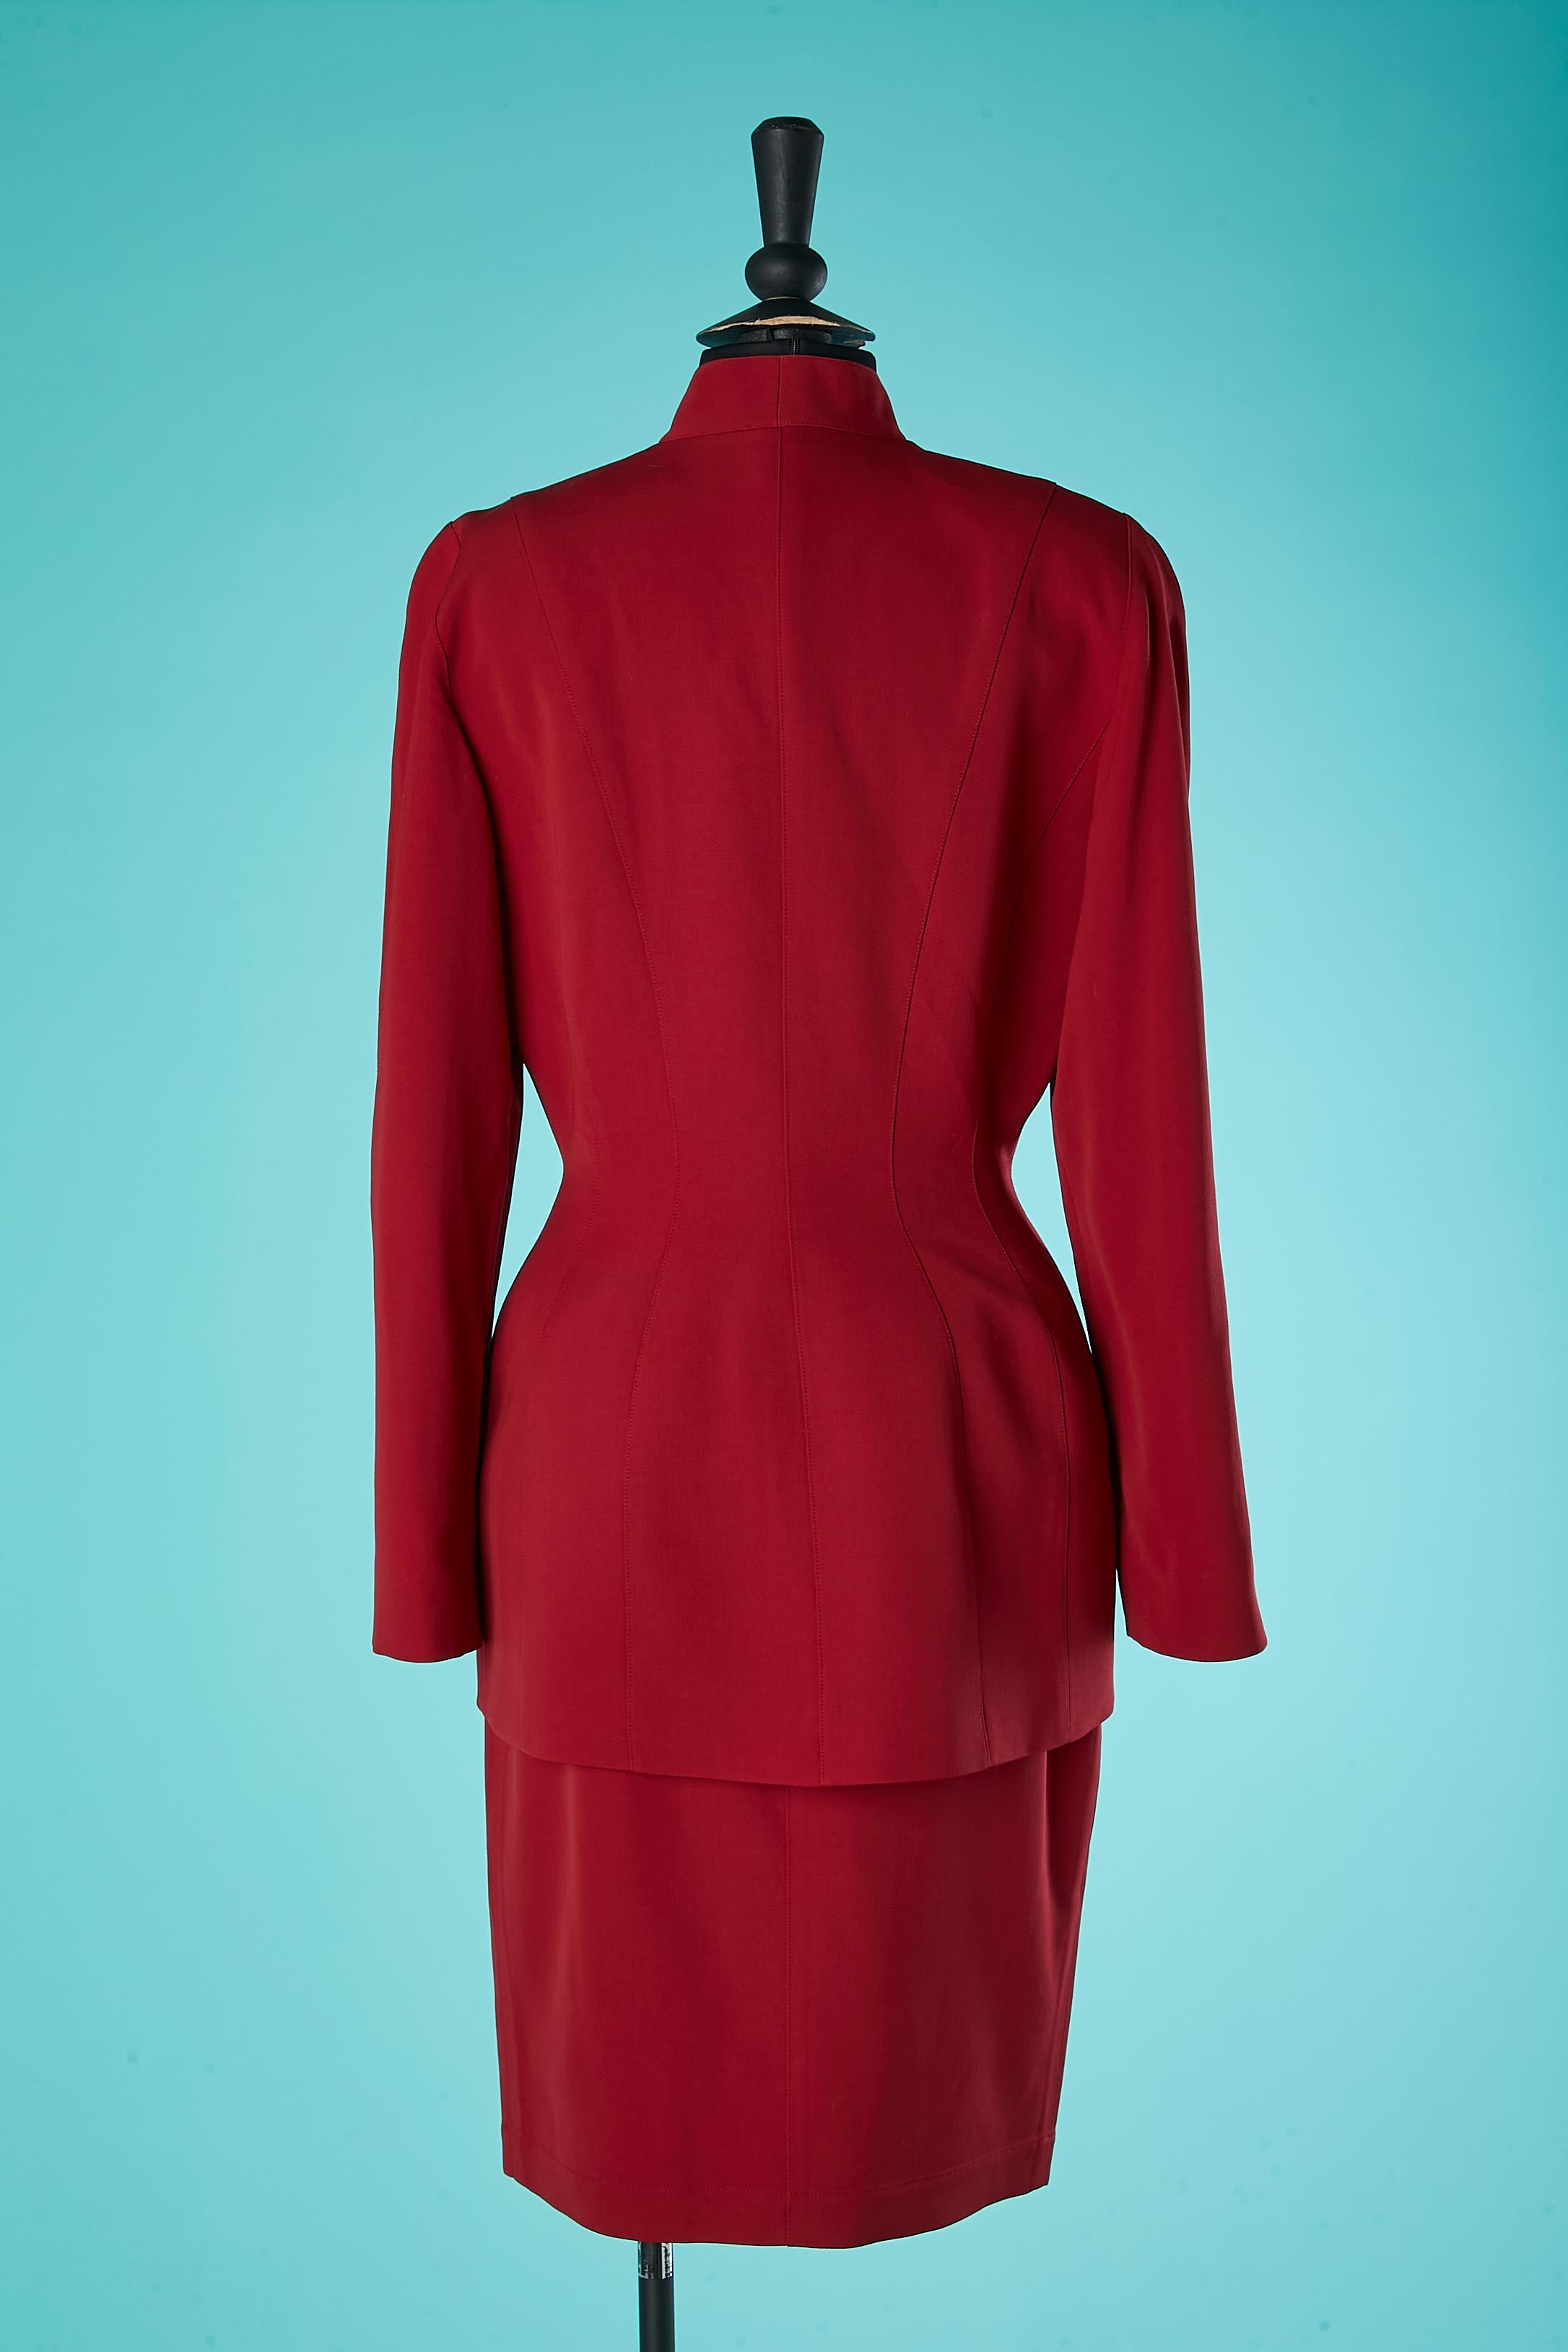 Wool burgundy skirt suit with silver claws Thierry Mugler Circa 1980's  For Sale 2